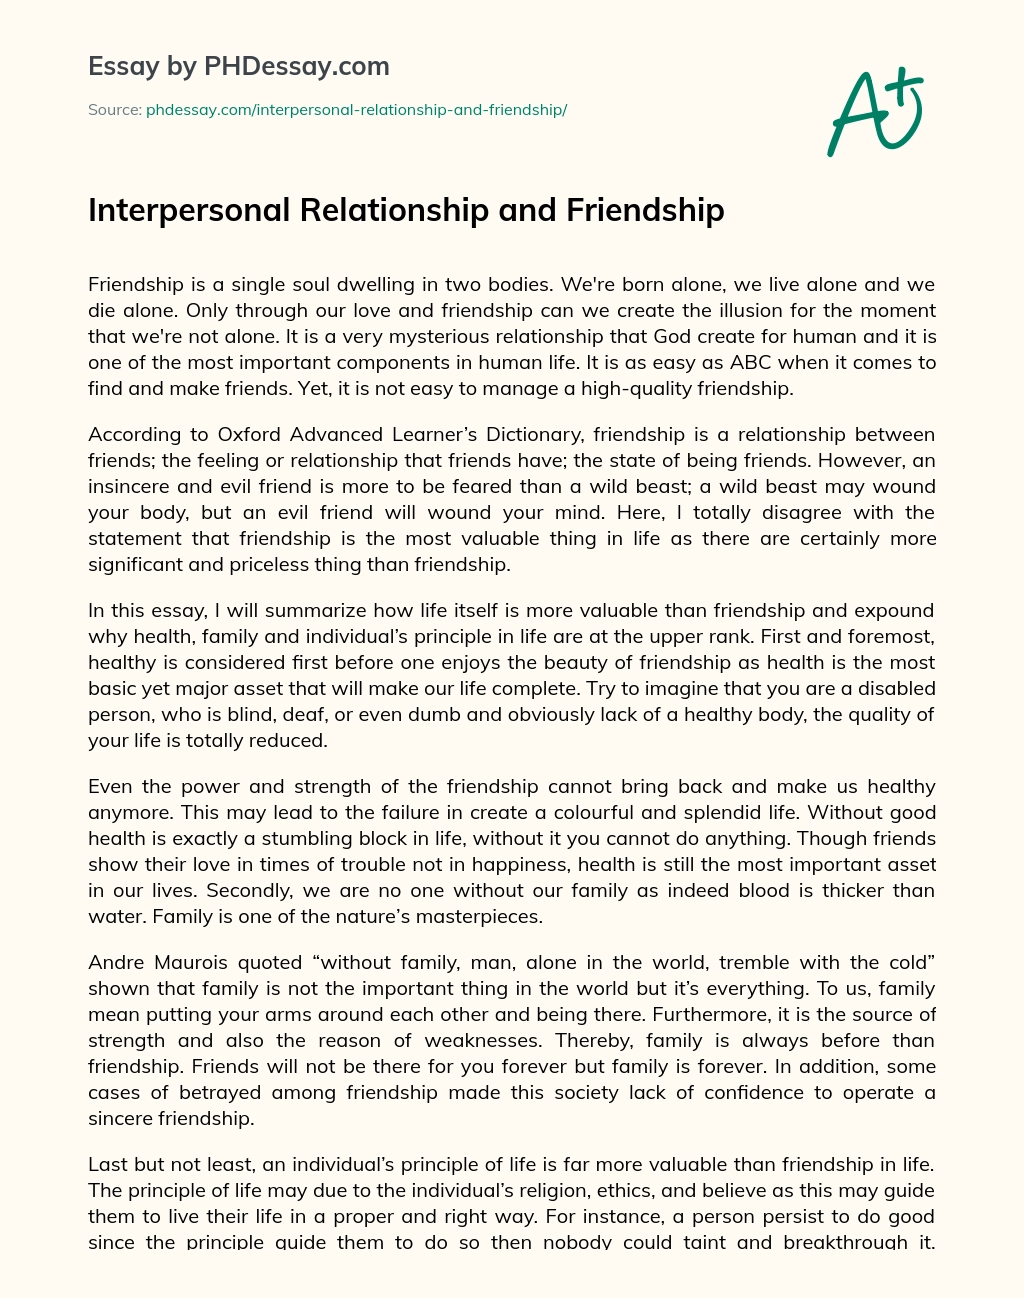 Interpersonal Relationship and Friendship essay